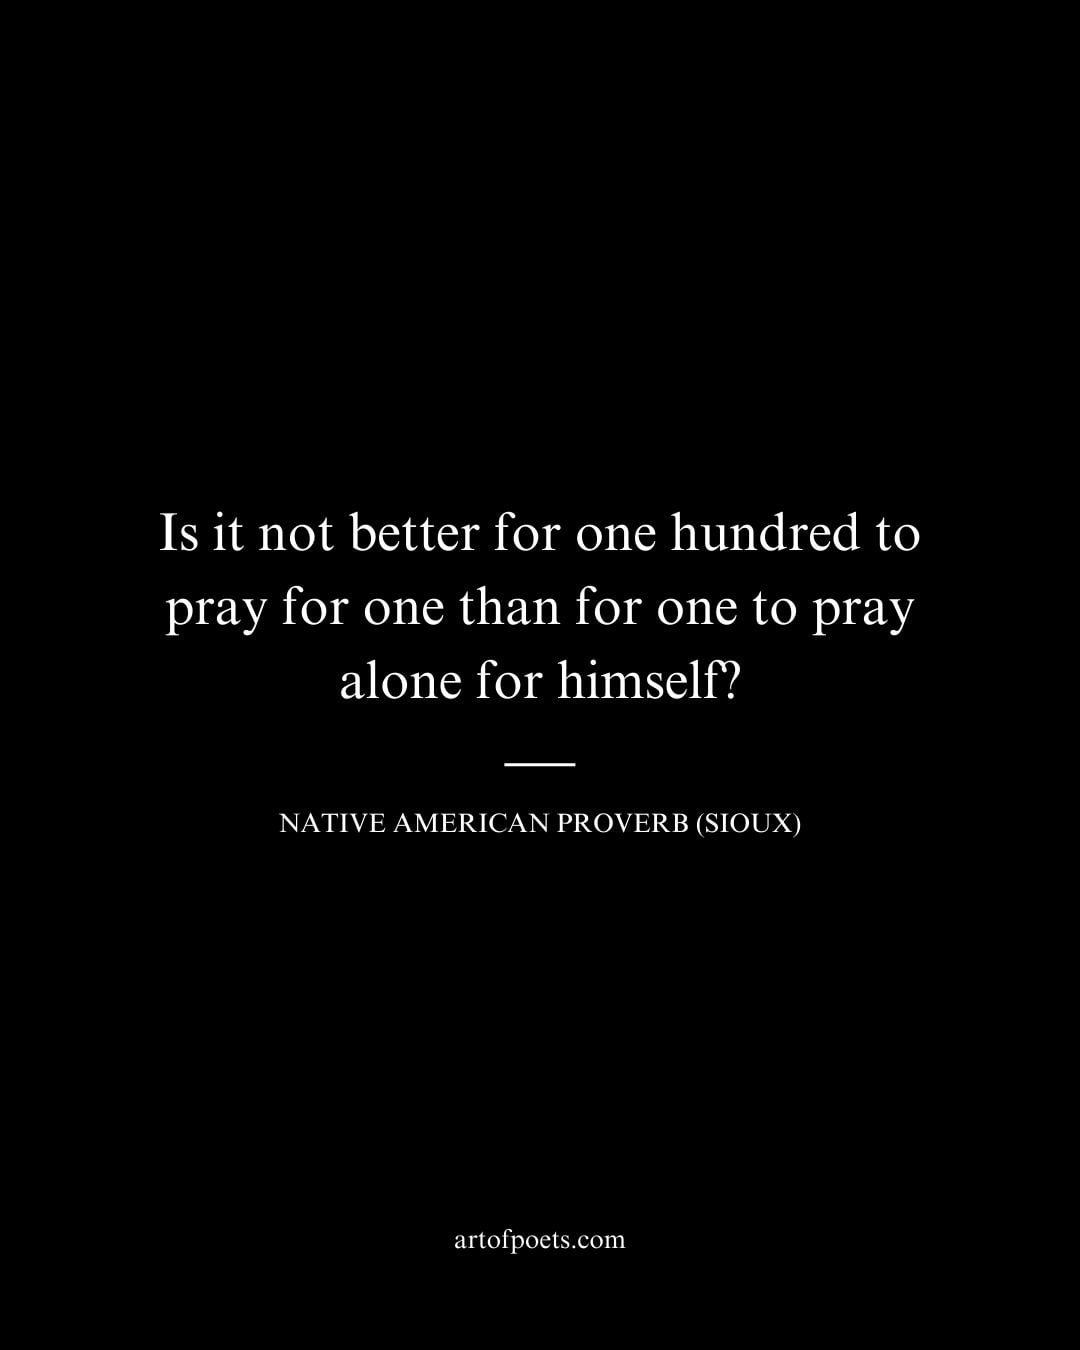 Is it not better for one hundred to pray for one than for one to pray alone for himself